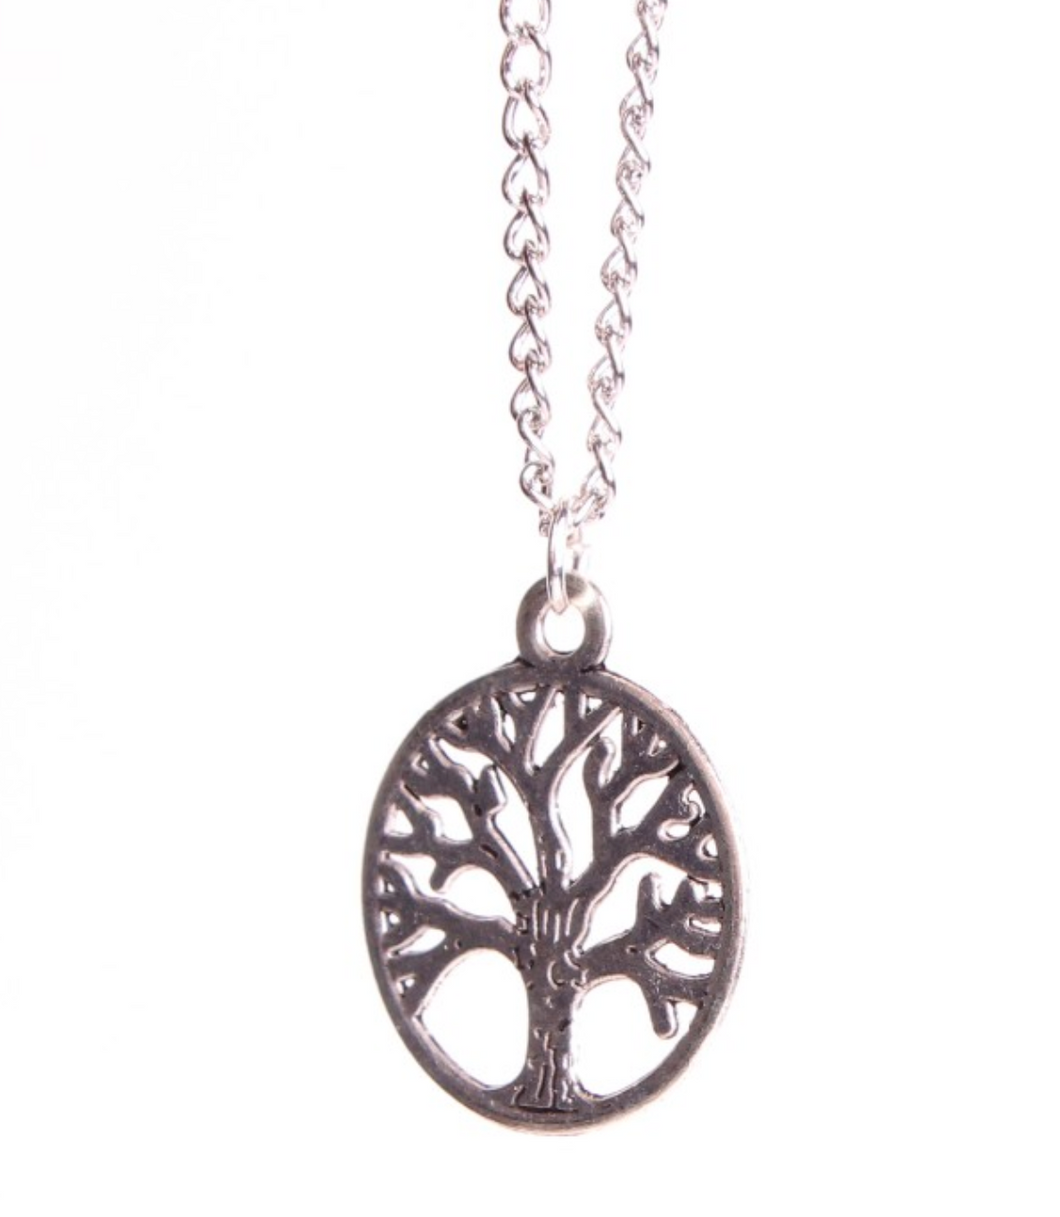 Family Tree of Life Branches Silver Pendant Necklace with Chain